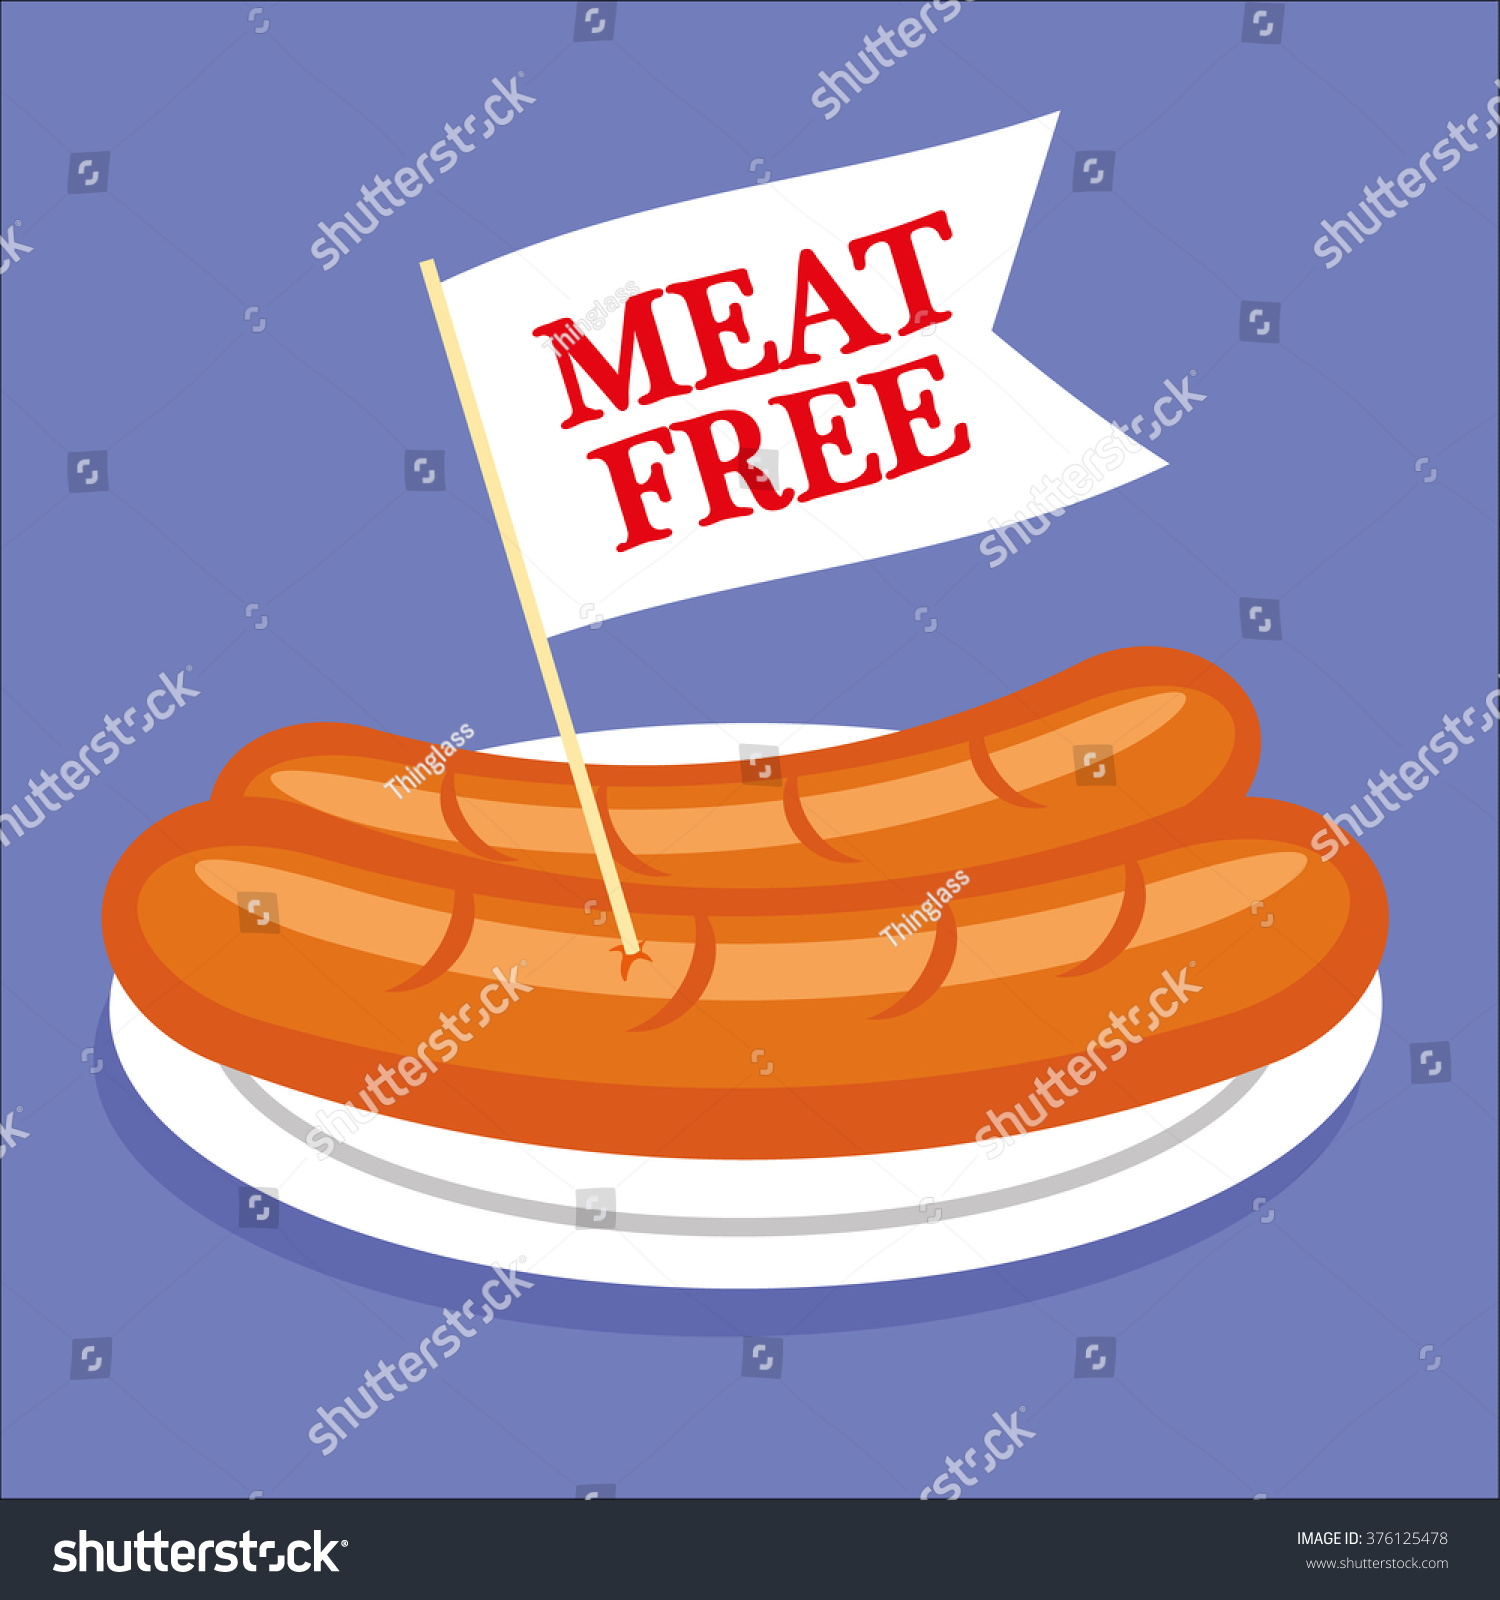 SVG of Two sausages or hot dogs on a plate with a white flag sticking out and the words Meat Free added in red text svg